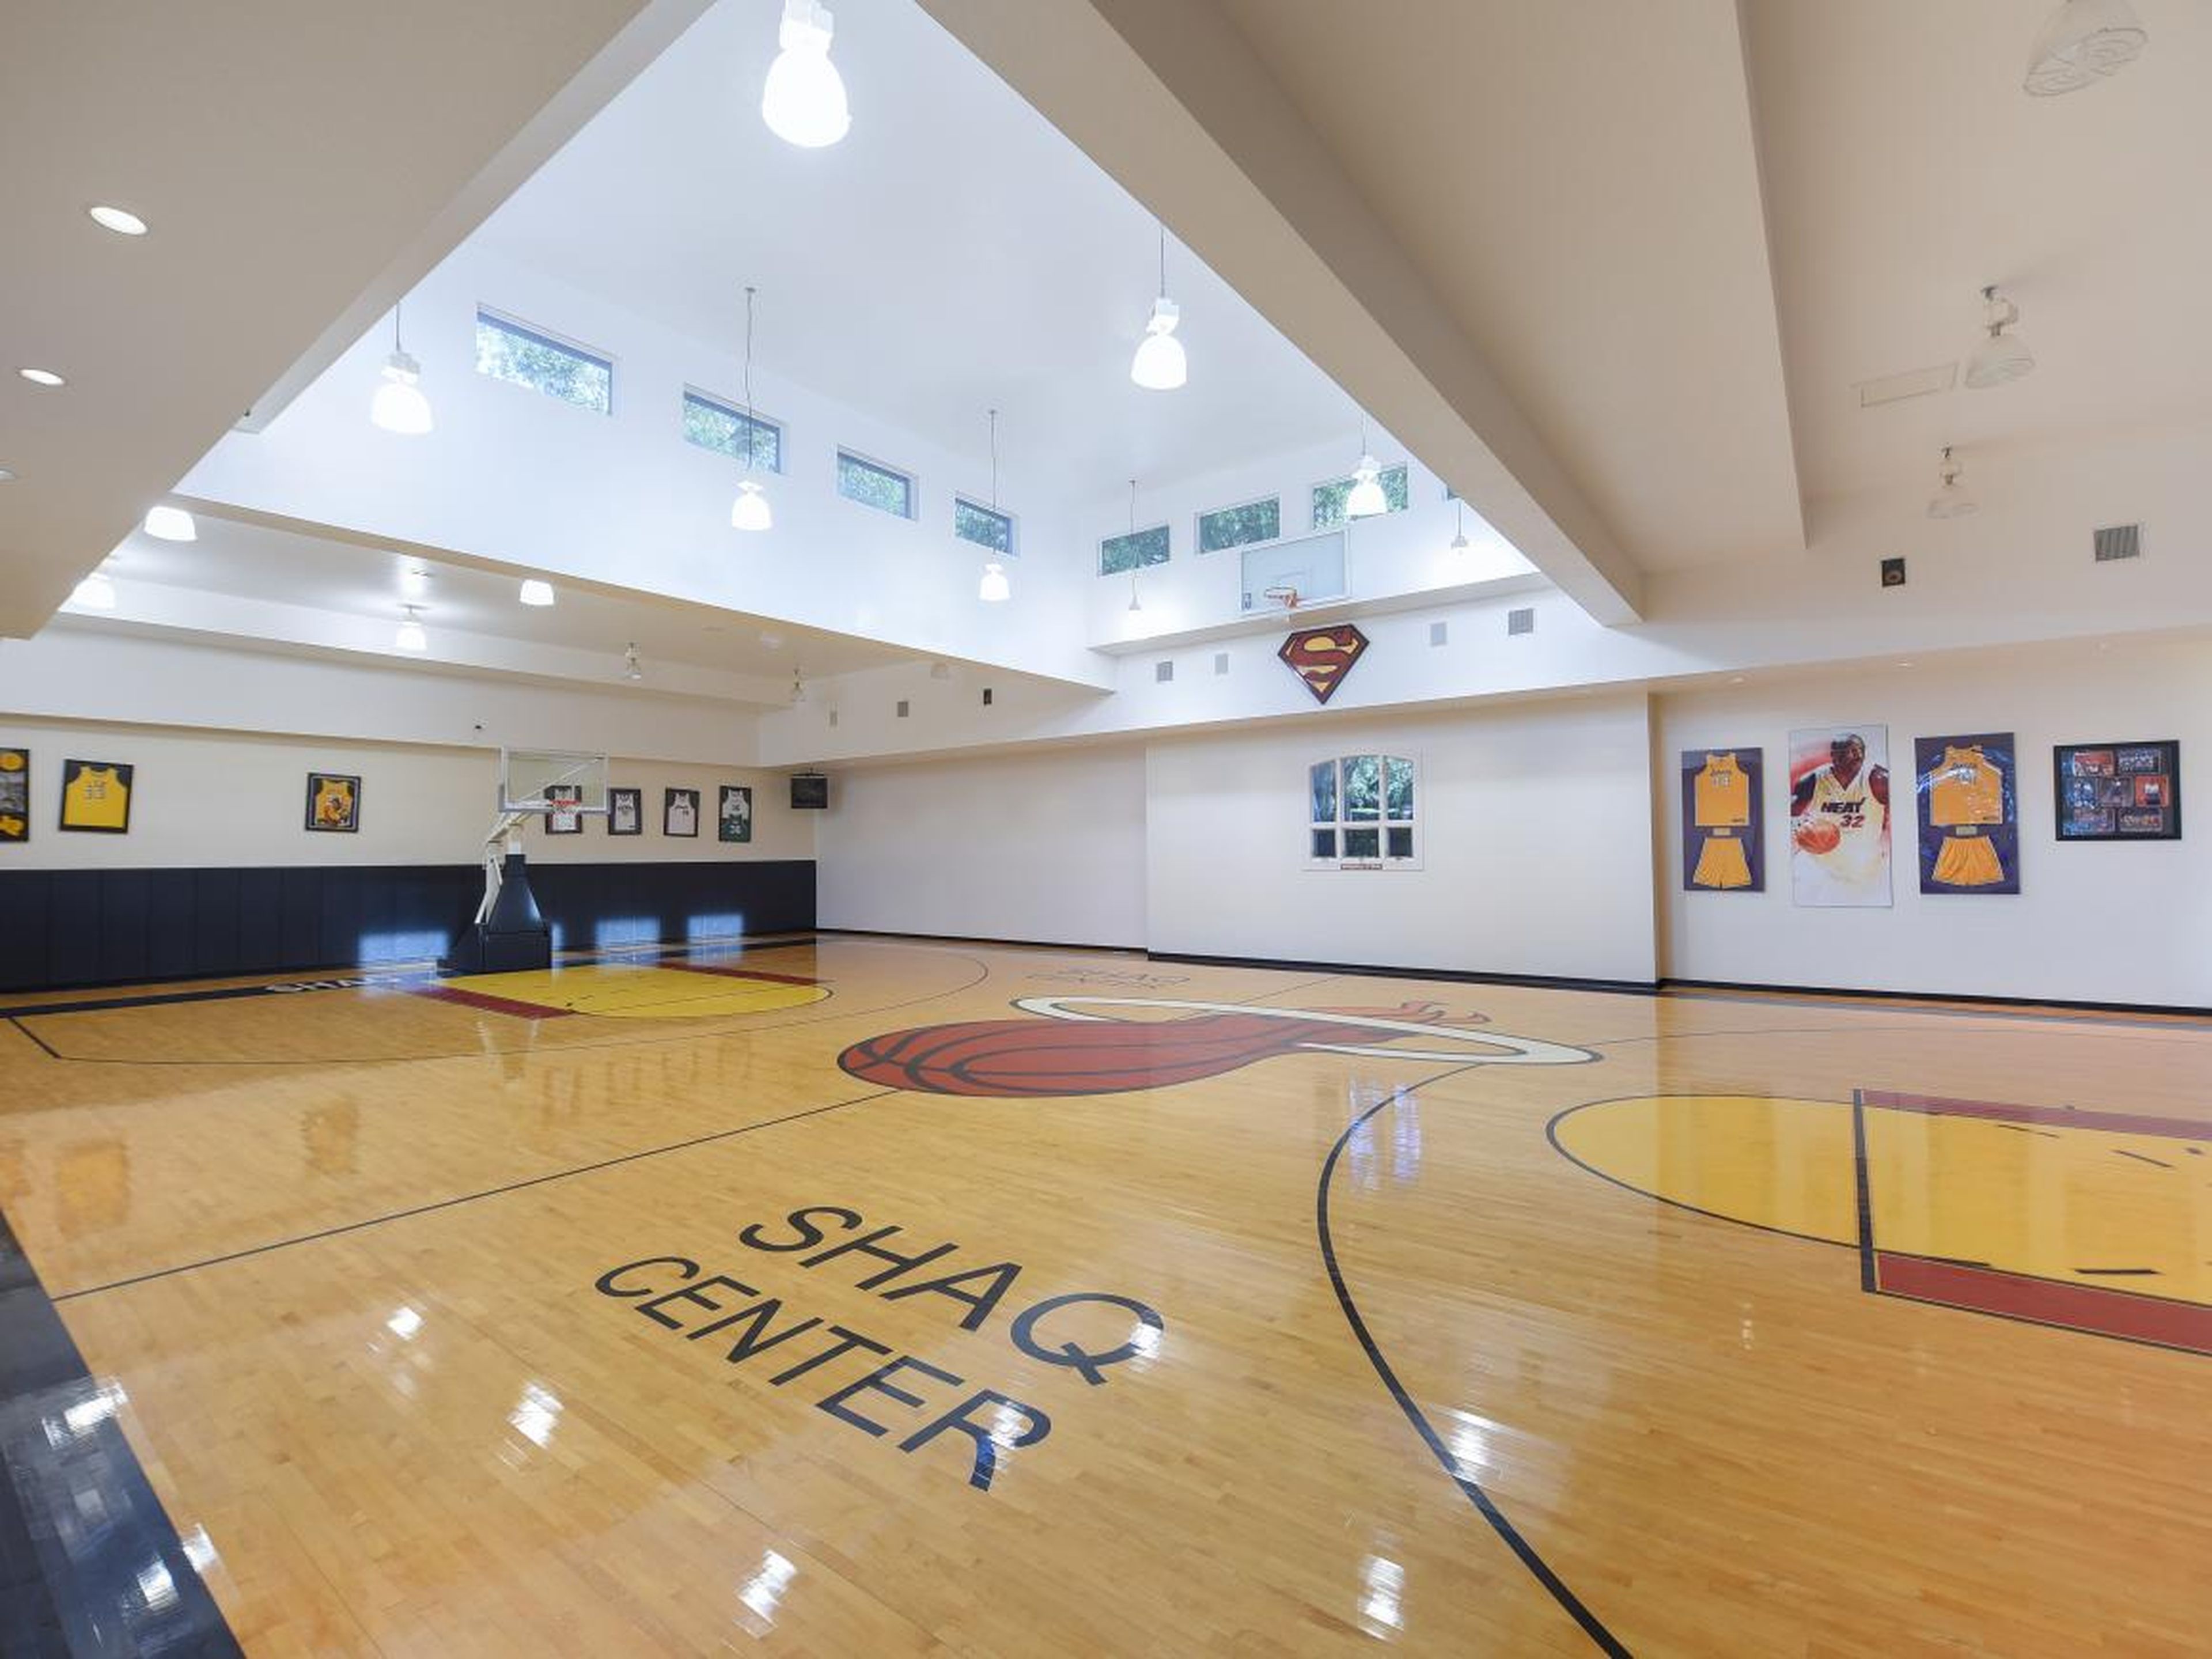 O'Neal's home also has many additional rooms, like a recording studio, a 17-car garage, a cigar bar and lounge, a home theater, and, of course, an indoor basketball court.